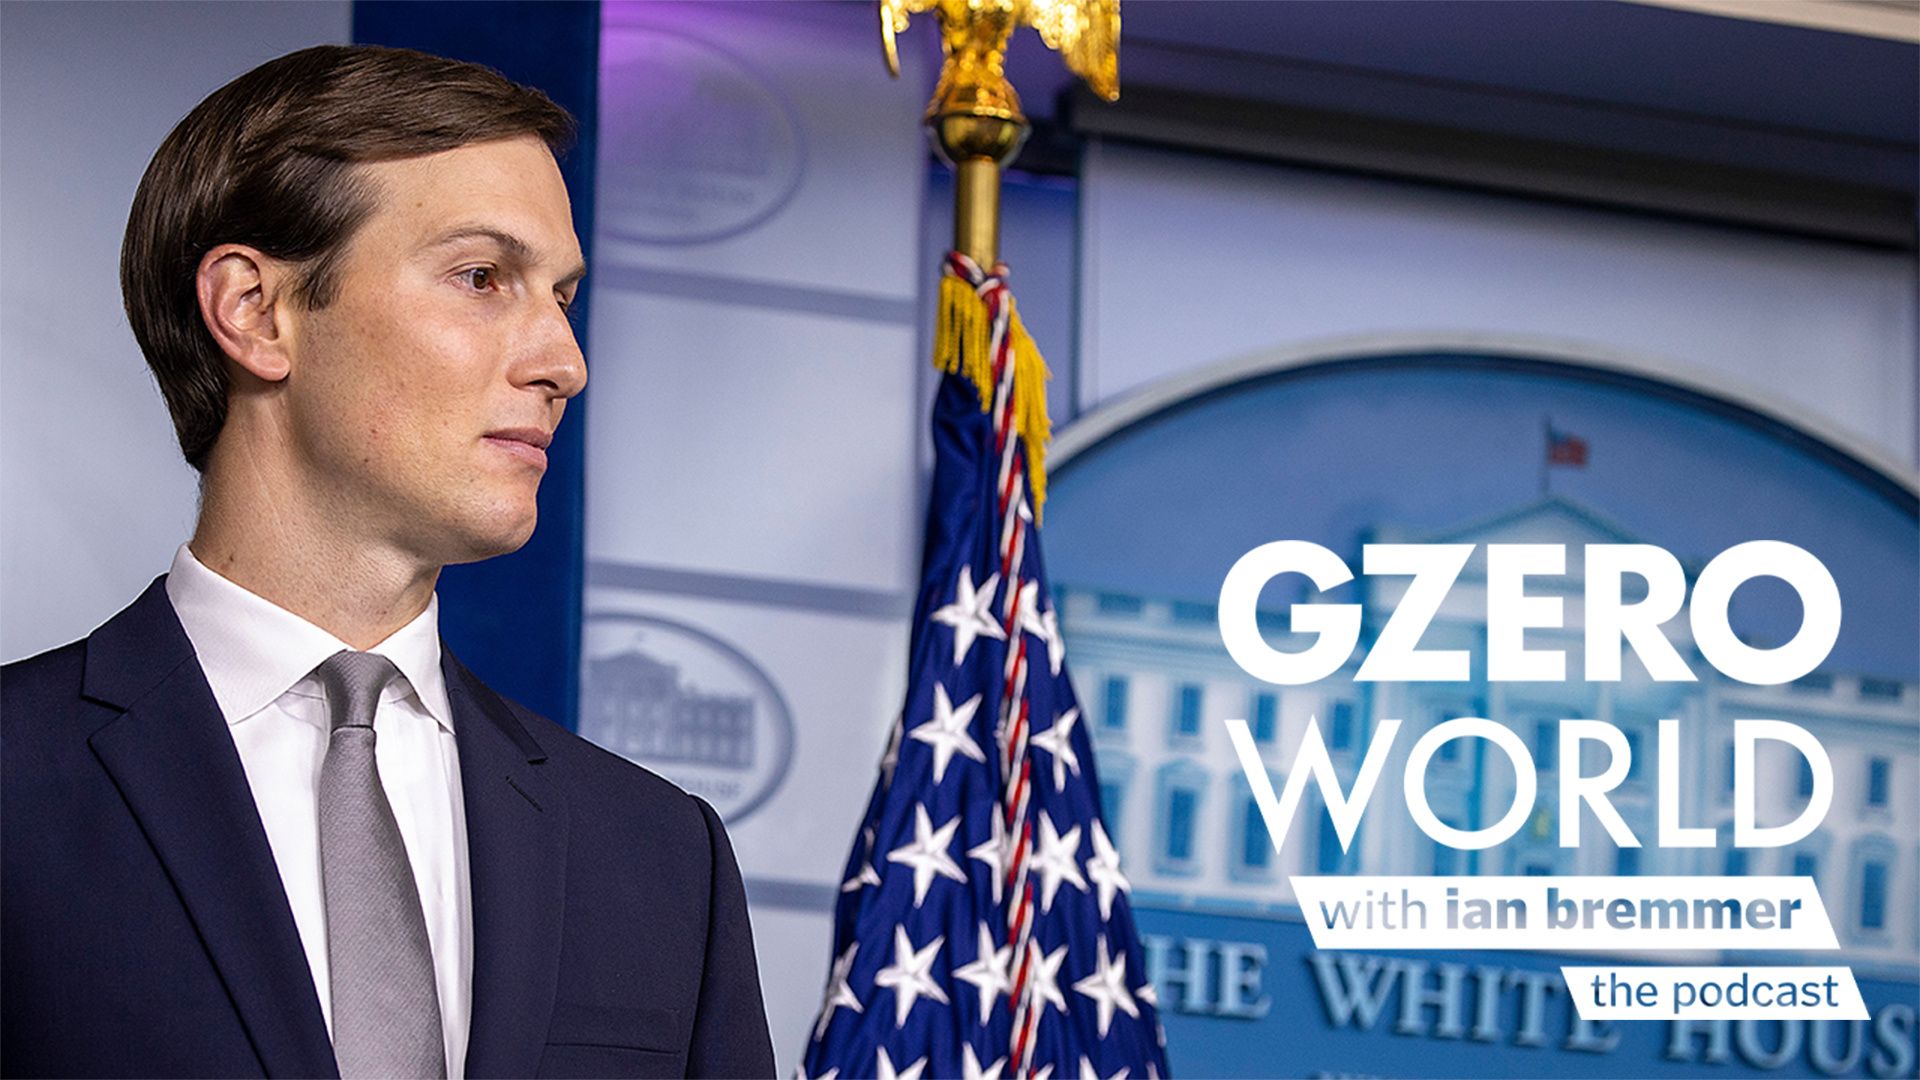 Jared Kushner in the White House - GZERO World with Ian Bremmer Podcast